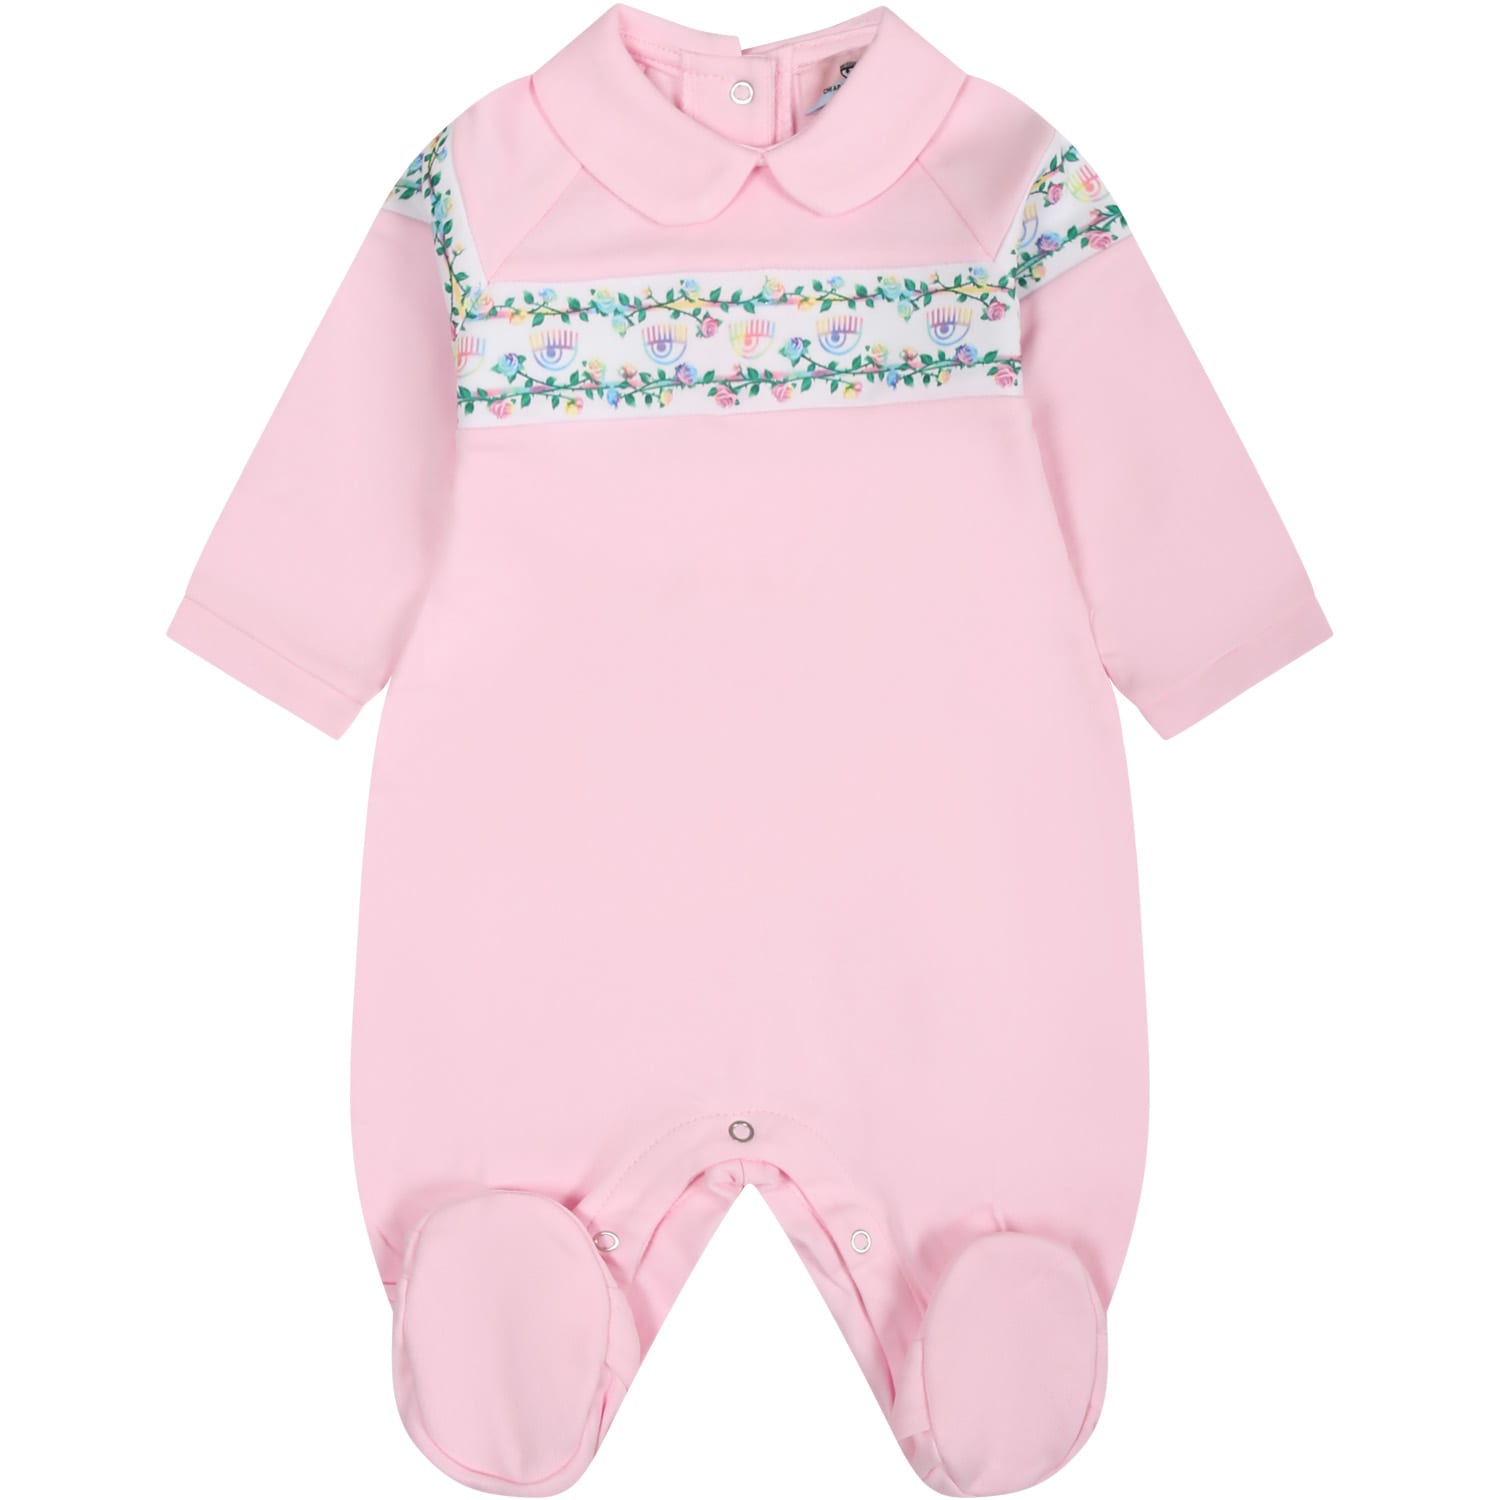 Chiara Ferragni Pink Playsuit For Baby Girl With Flirting Eyes And Multicolor Roses